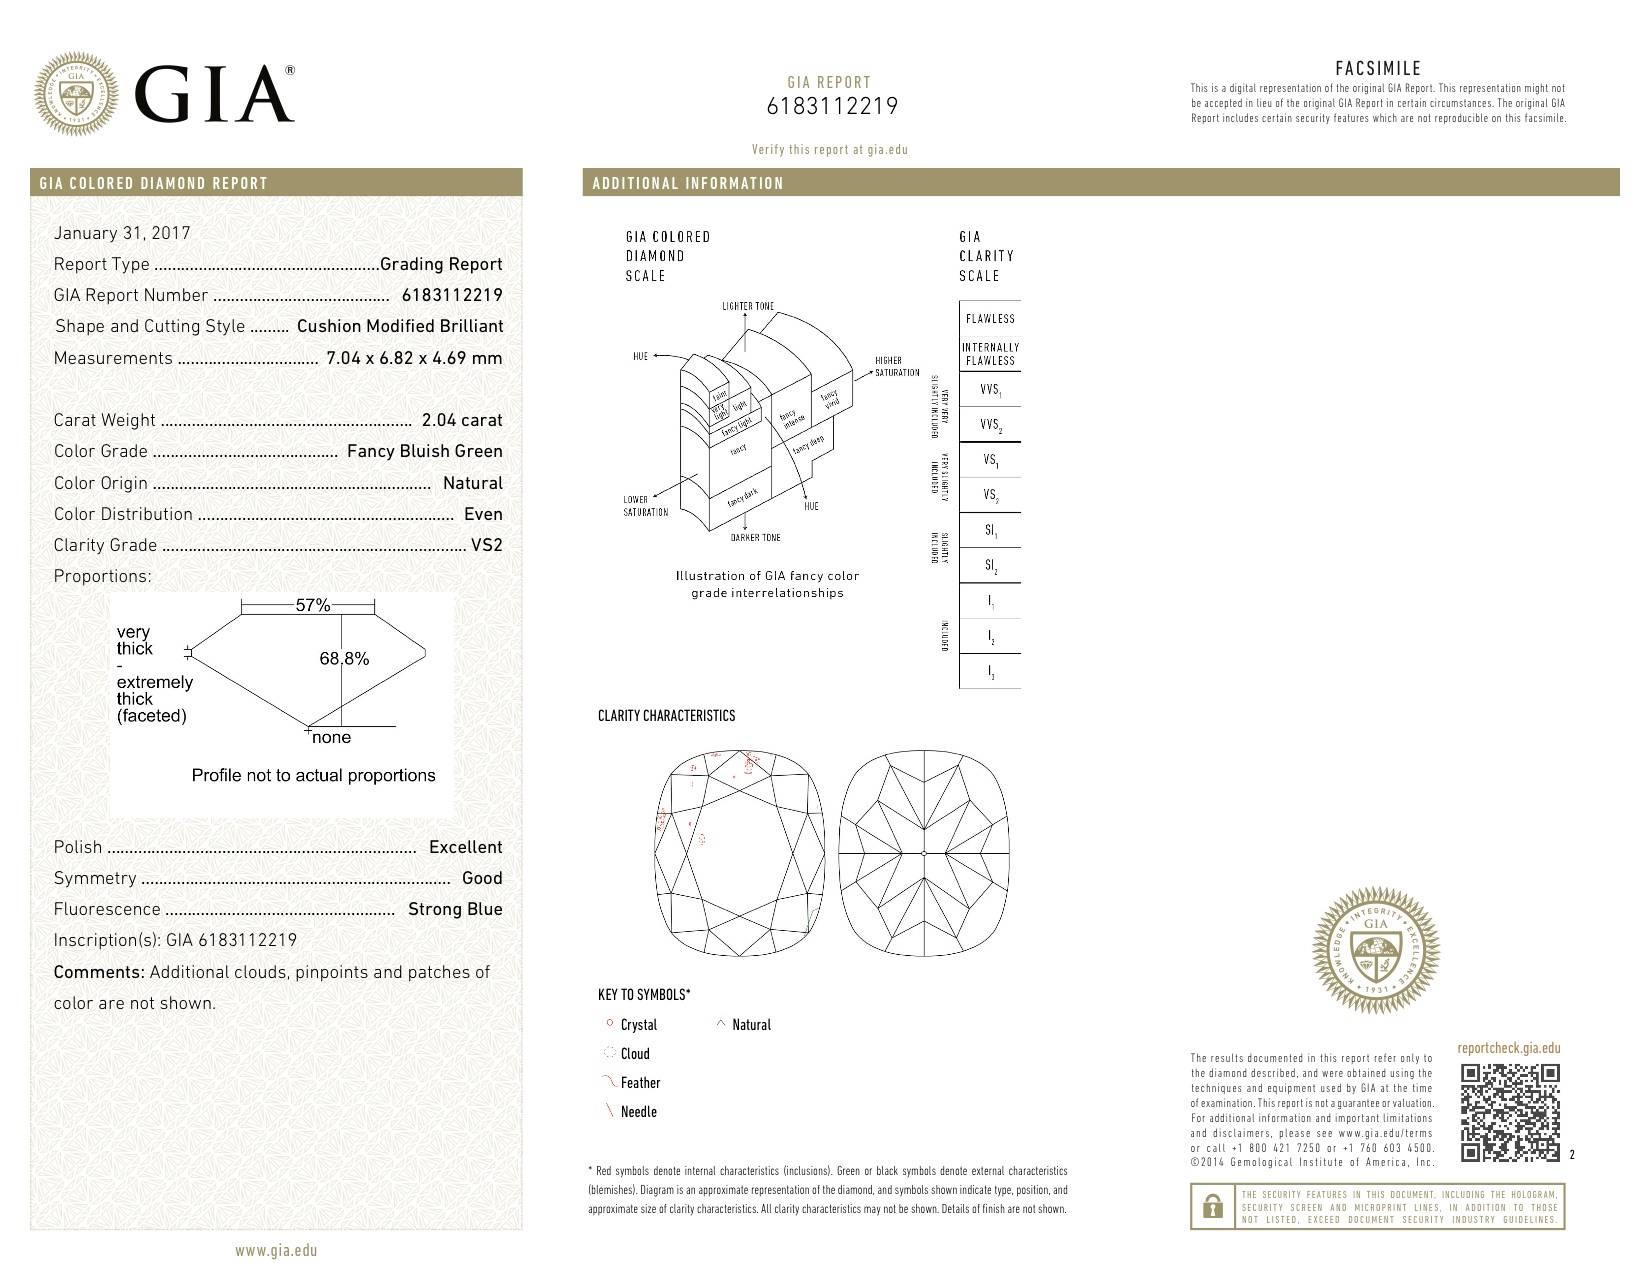 Immensely rare and exotic 2.04ct fancy bluish green, VS2, cushion loose diamond.
GIA certificate attached.